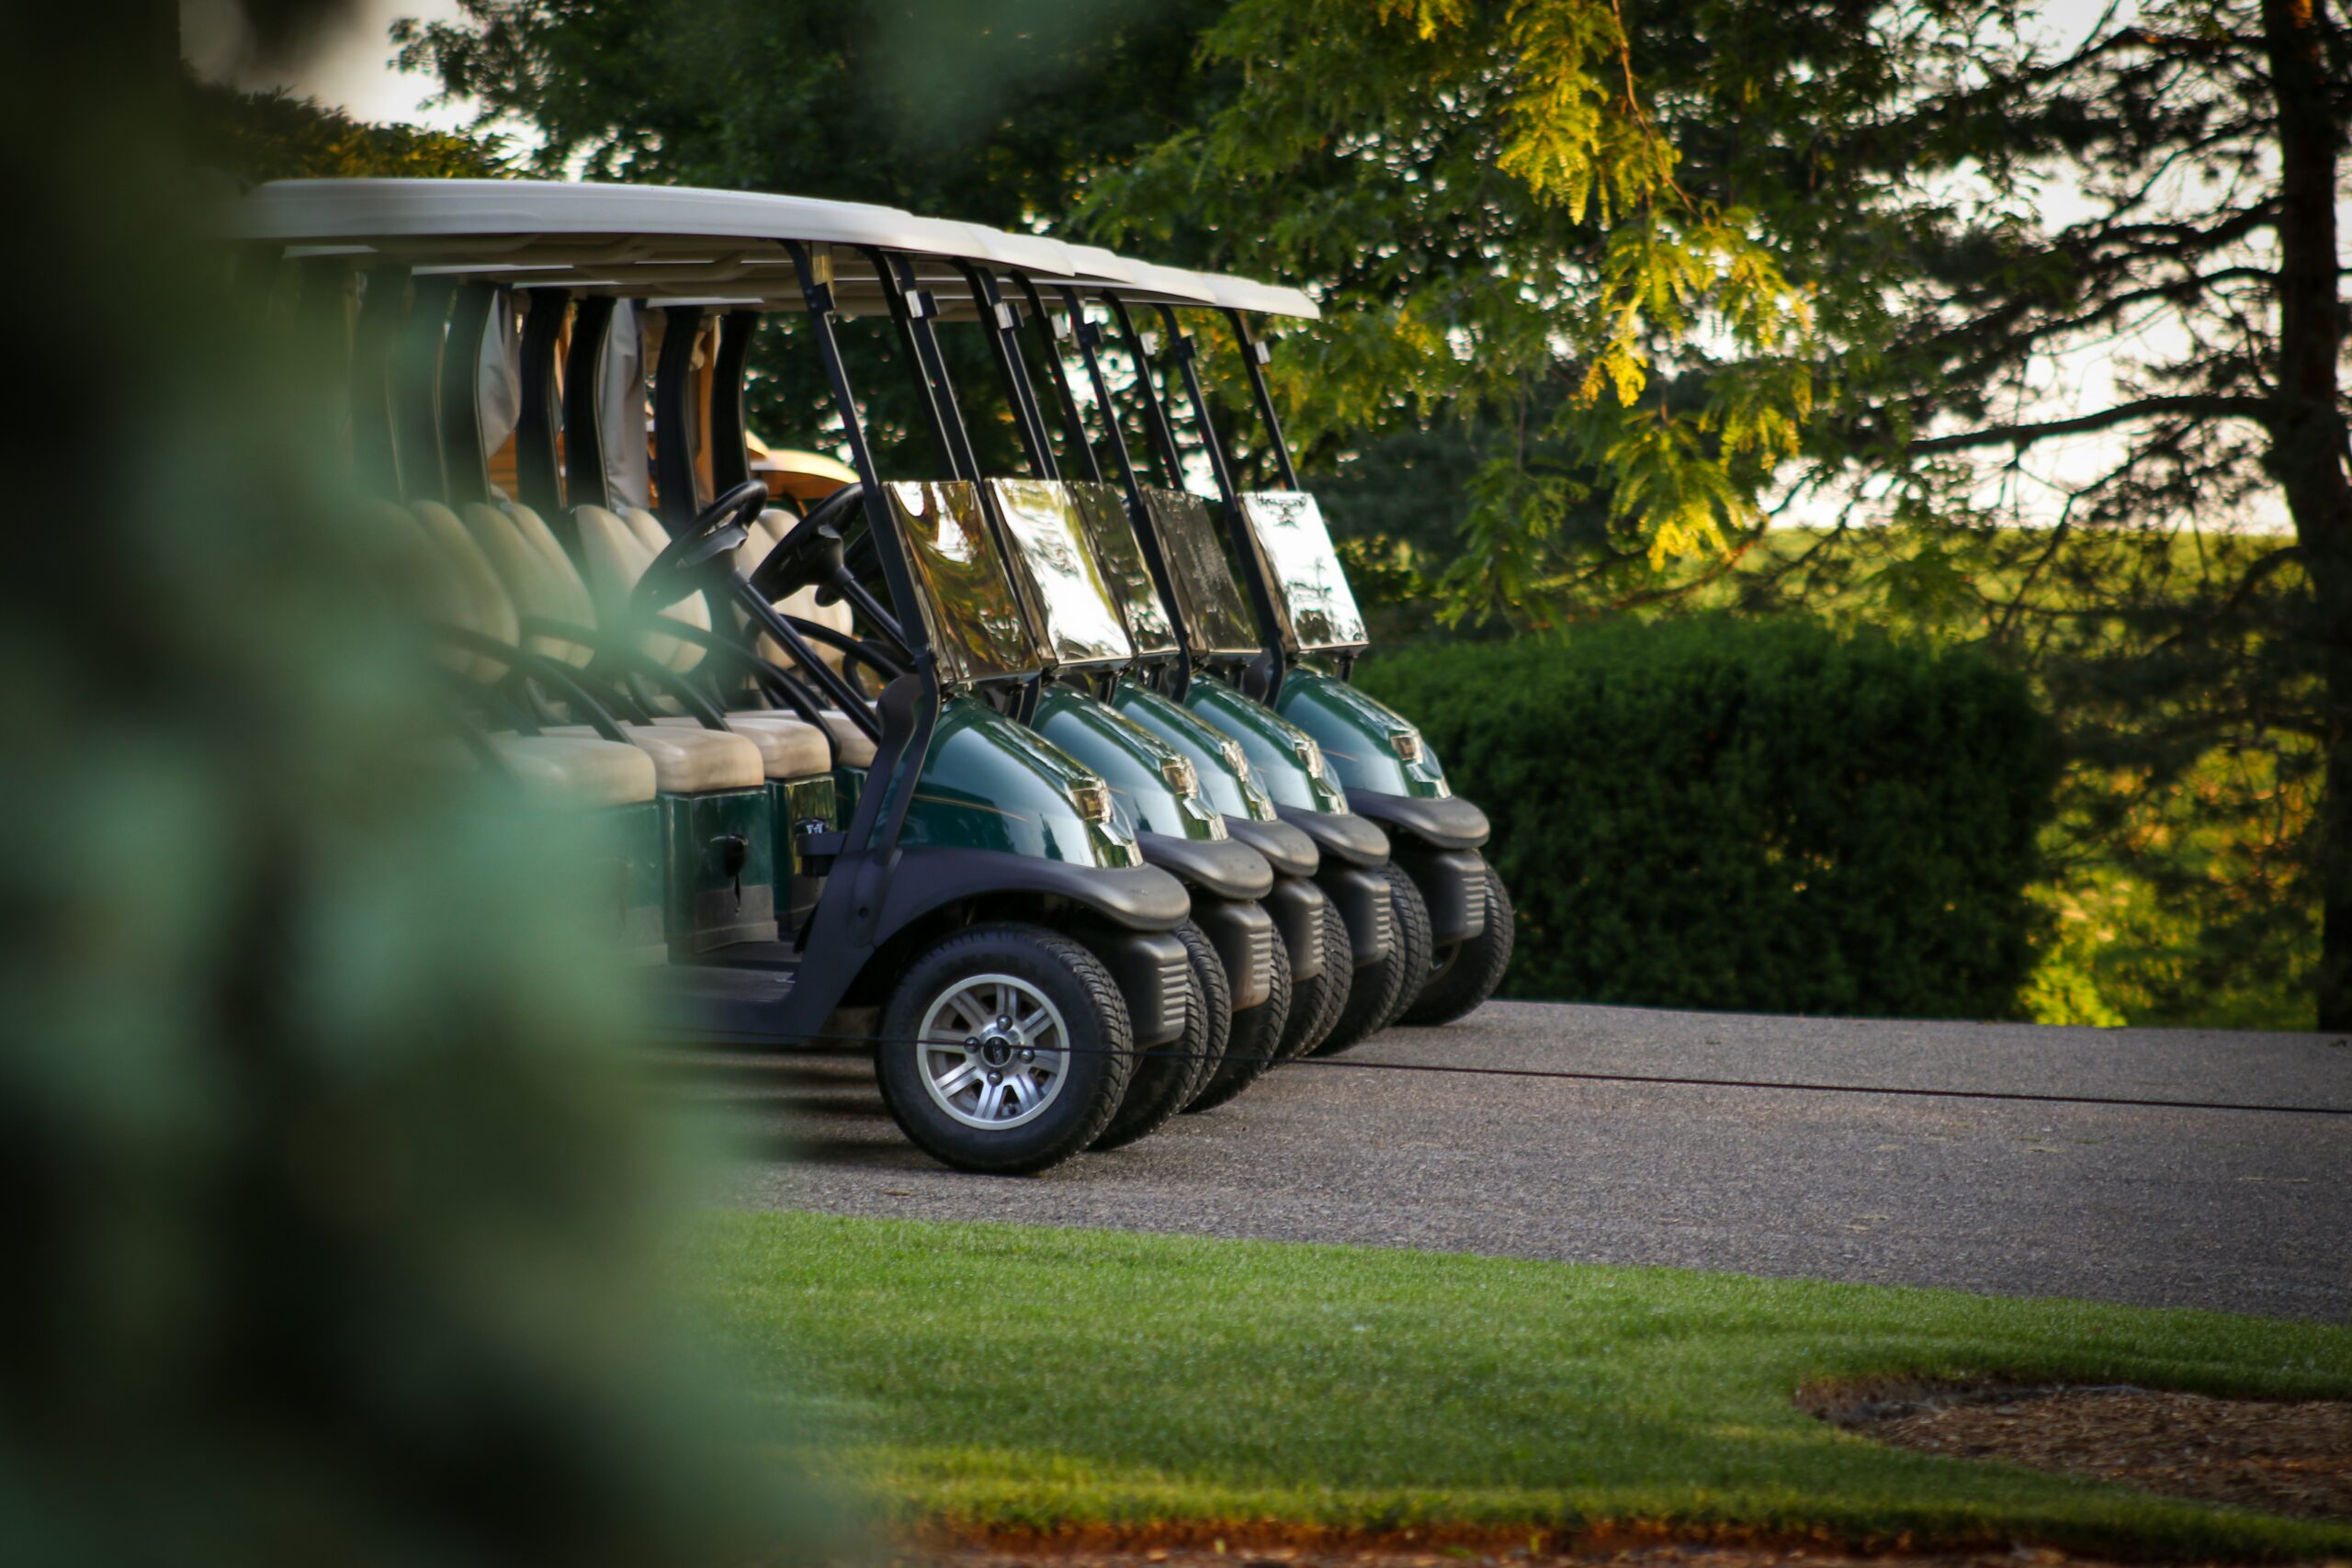 How Long Does it Take to Charge a Golf Cart? - J's Golf Carts